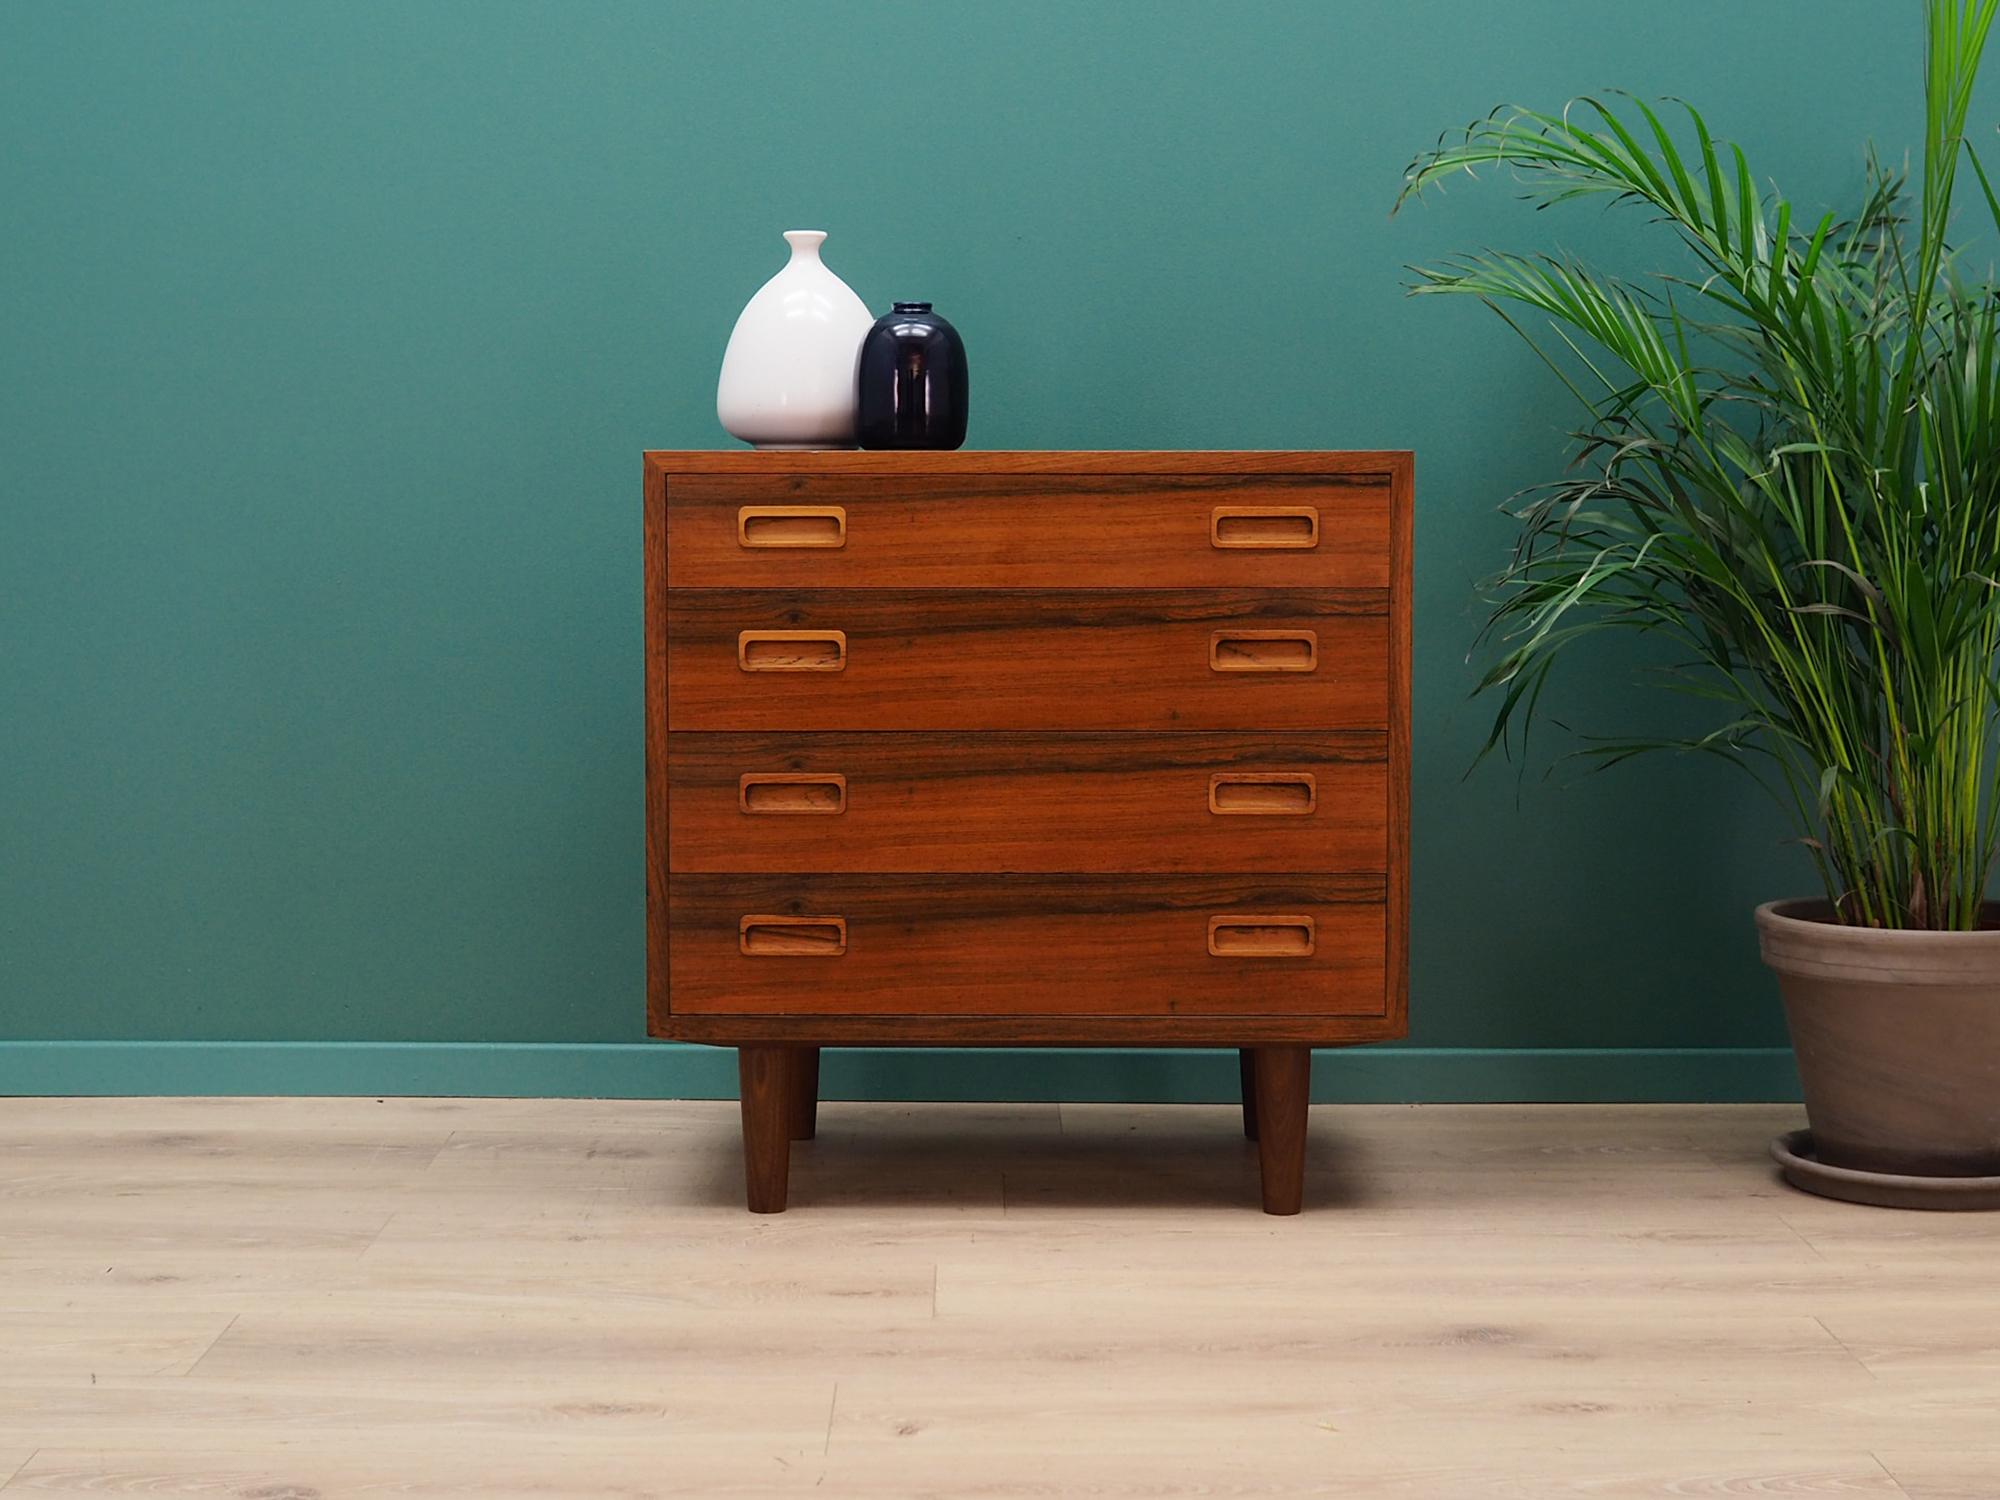 Fantastic chest of drawers from the 1960s-1970s. Scandinavian design, Minimalist form. Manufactured by Hundevad & Co. The furniture is finished with rosewood veneer. The chest has four packed drawers. Preserved in good condition (minor bruises and